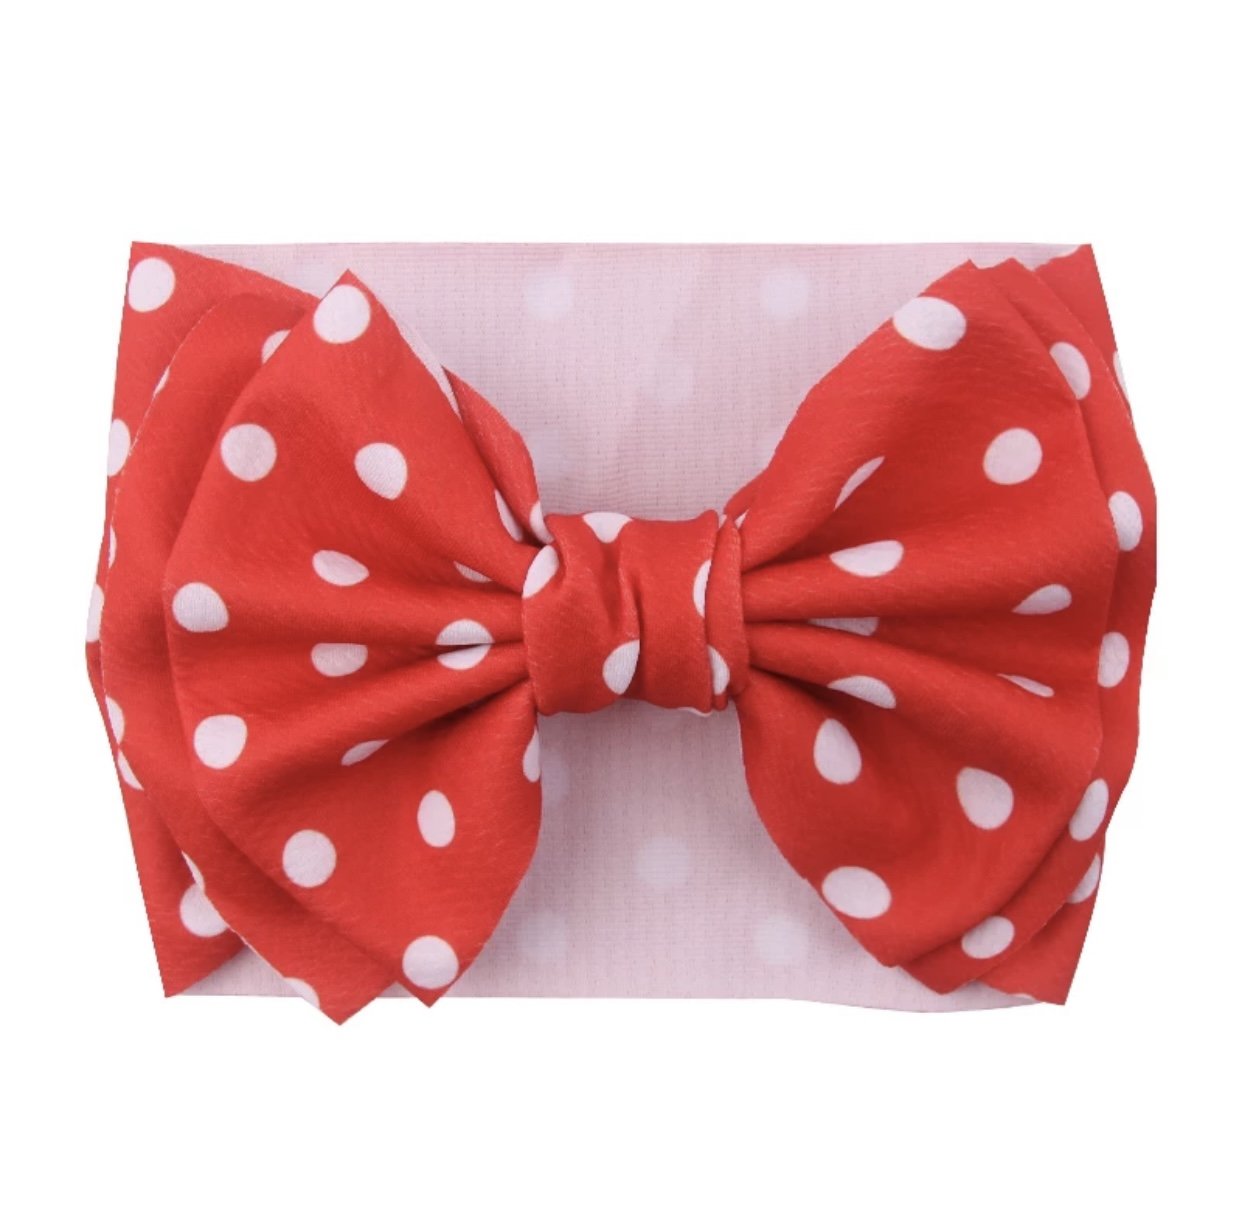 Frenchie Bow Packs - Red Hot